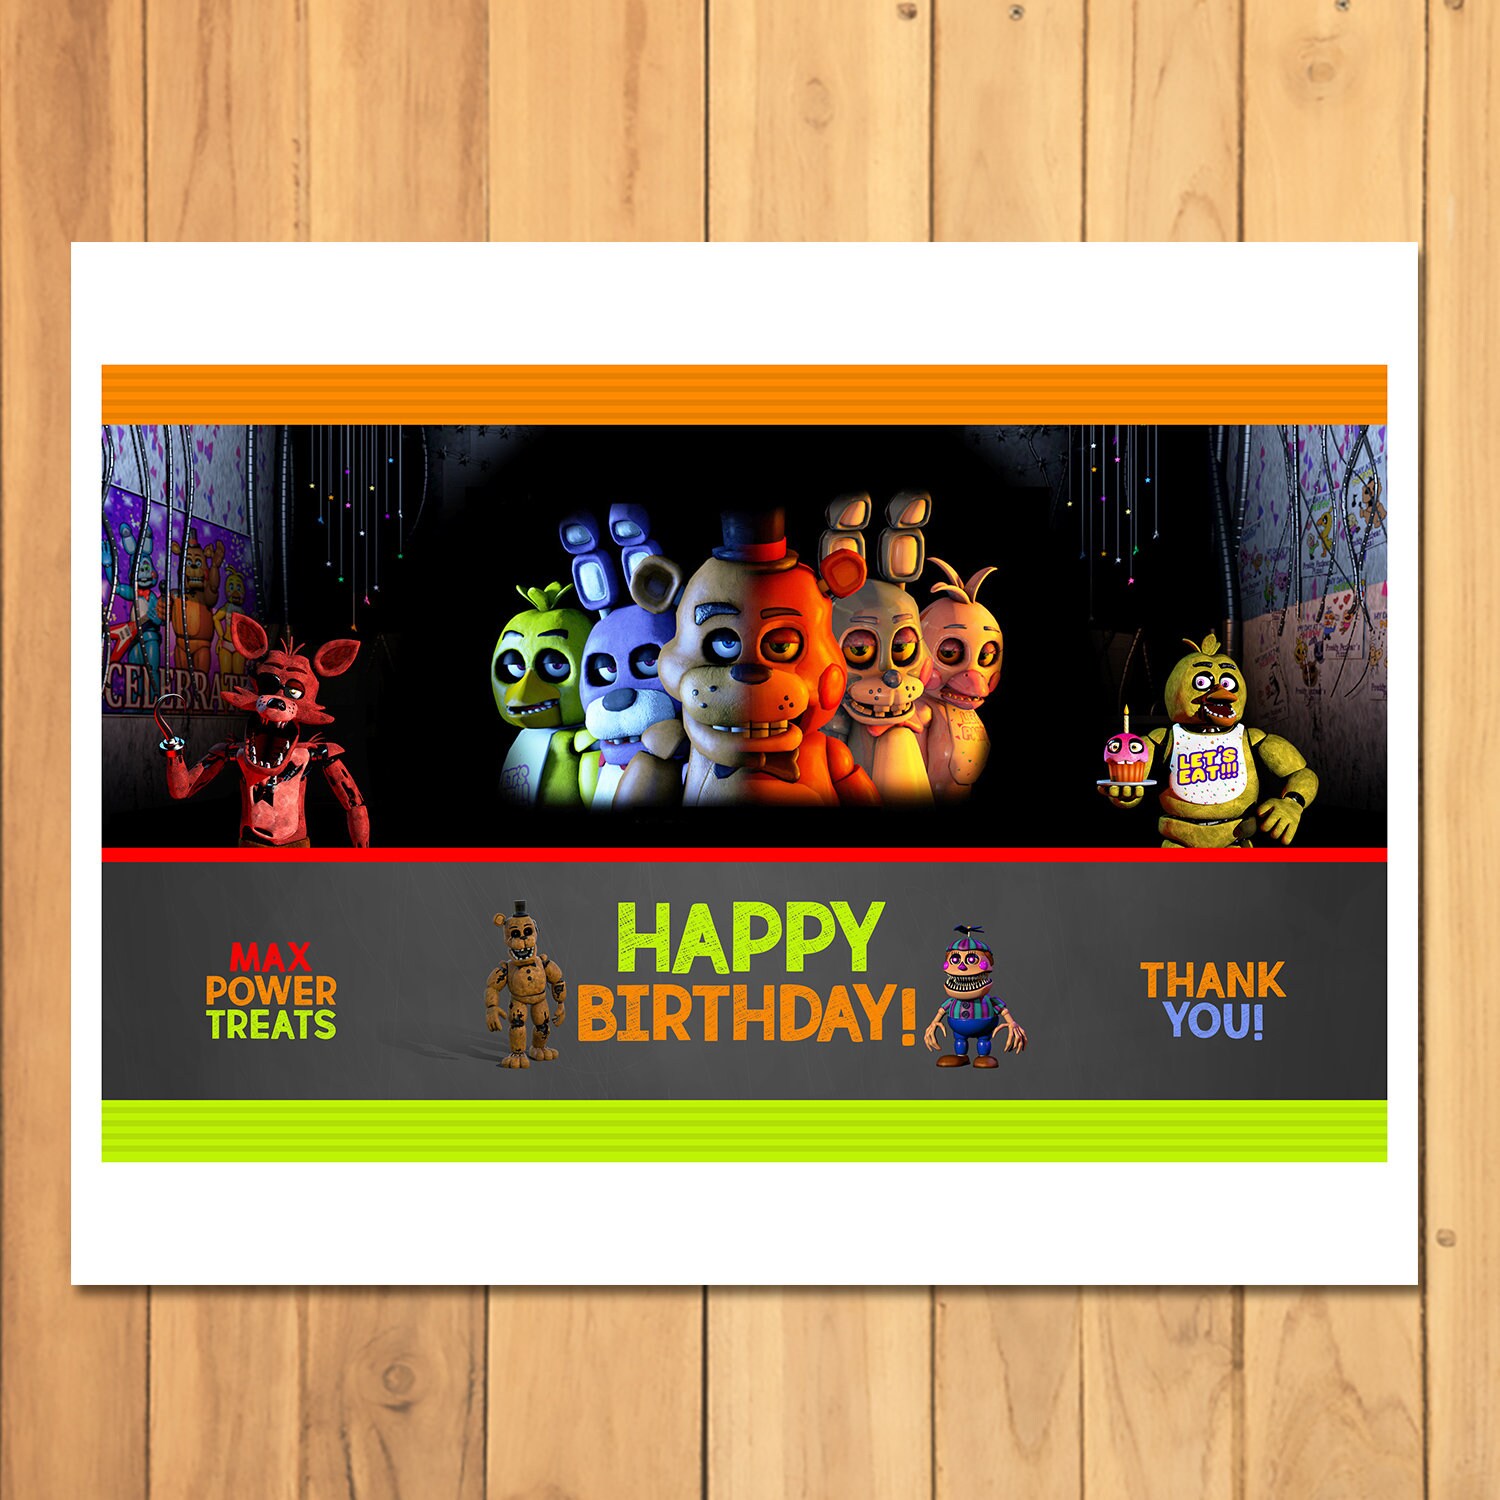 FIVE NIGHTS AT FREDDY'S Party Favor Chip Bags - The Brat Shack, NY